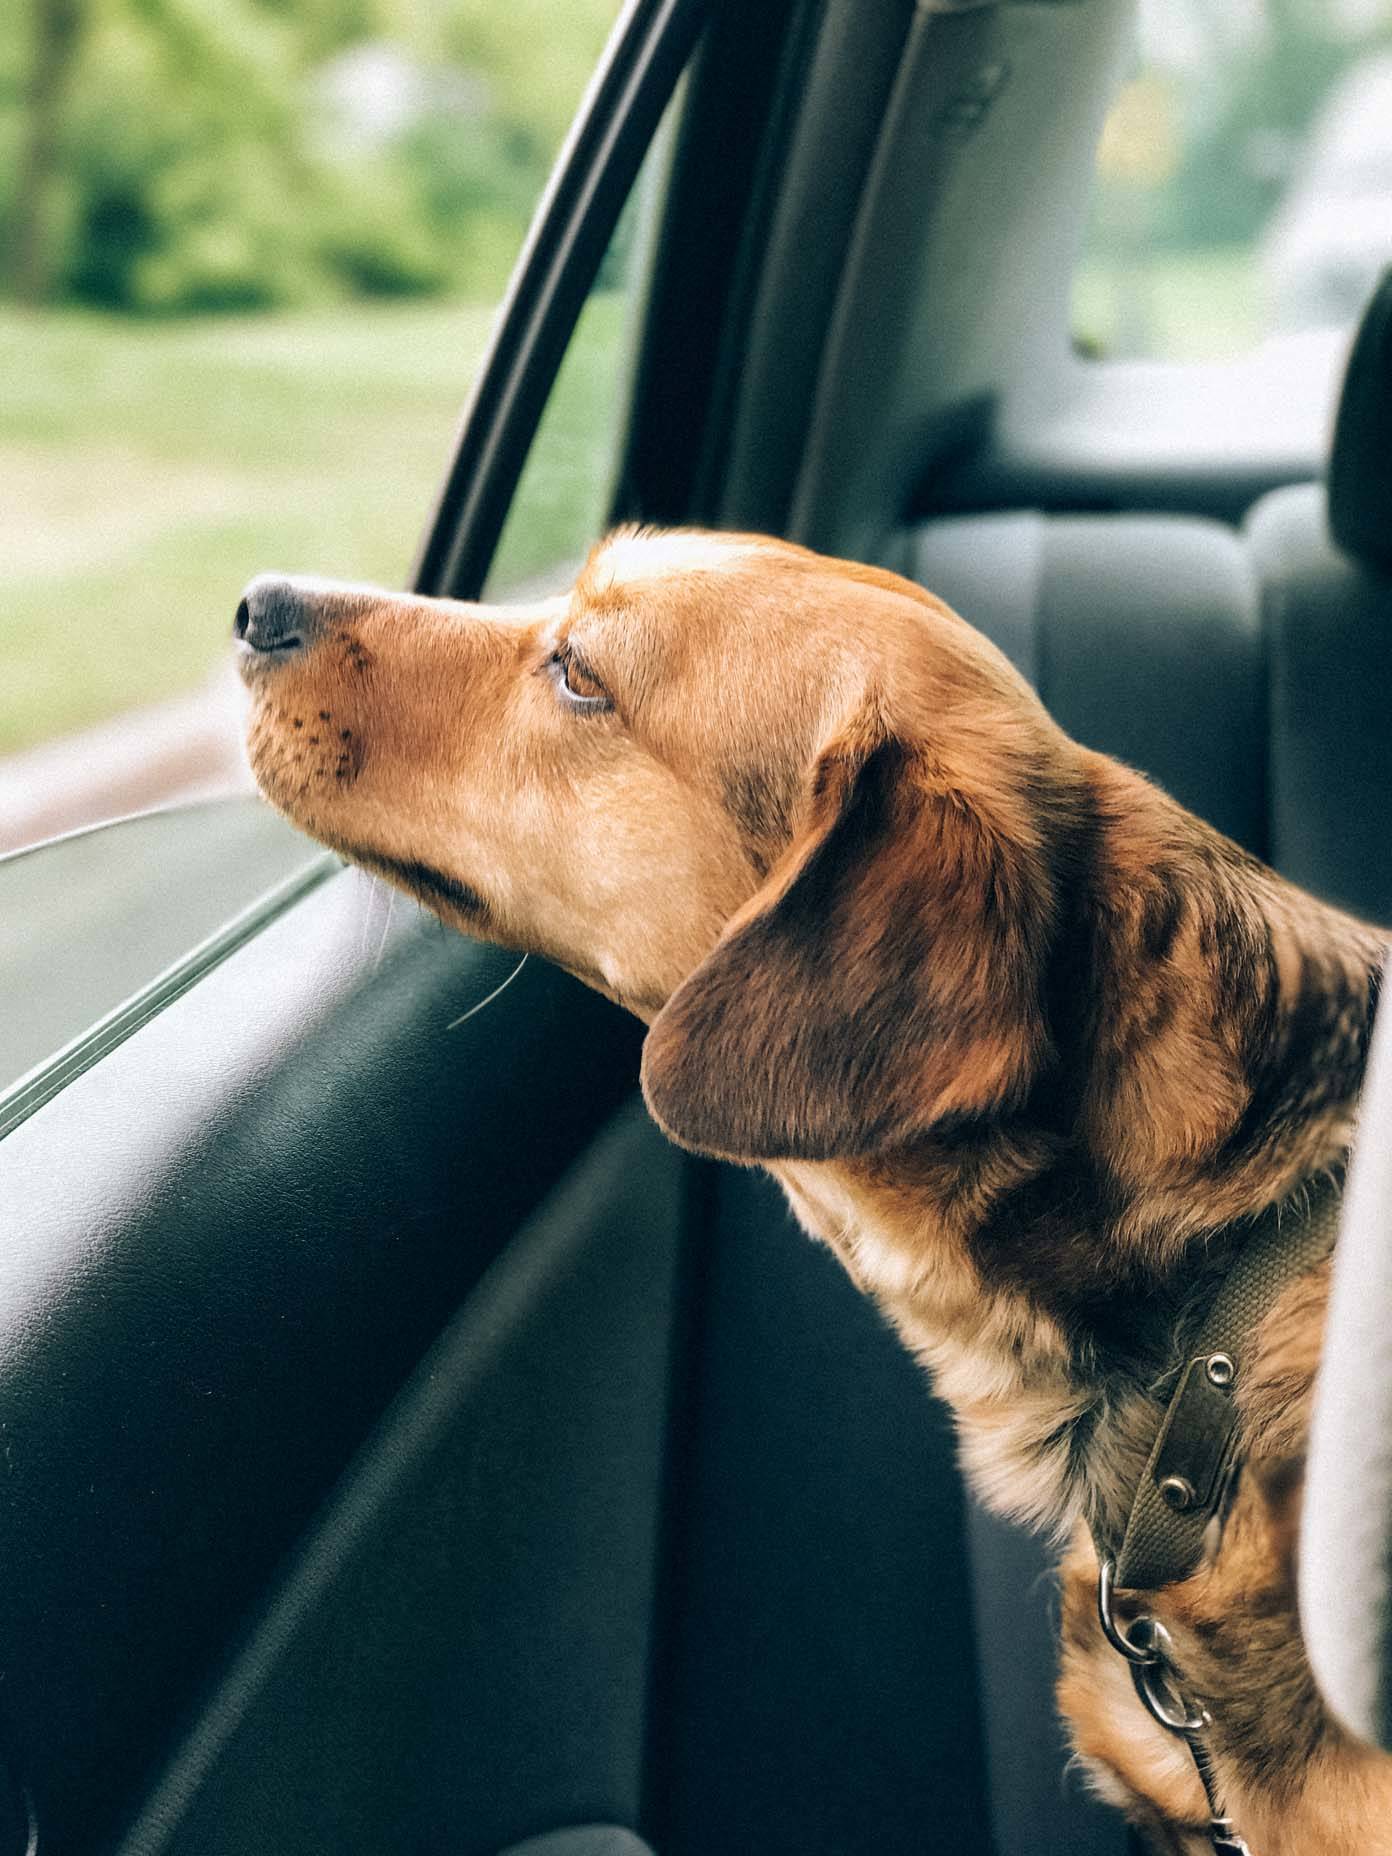 A dog looking out the window of a car.